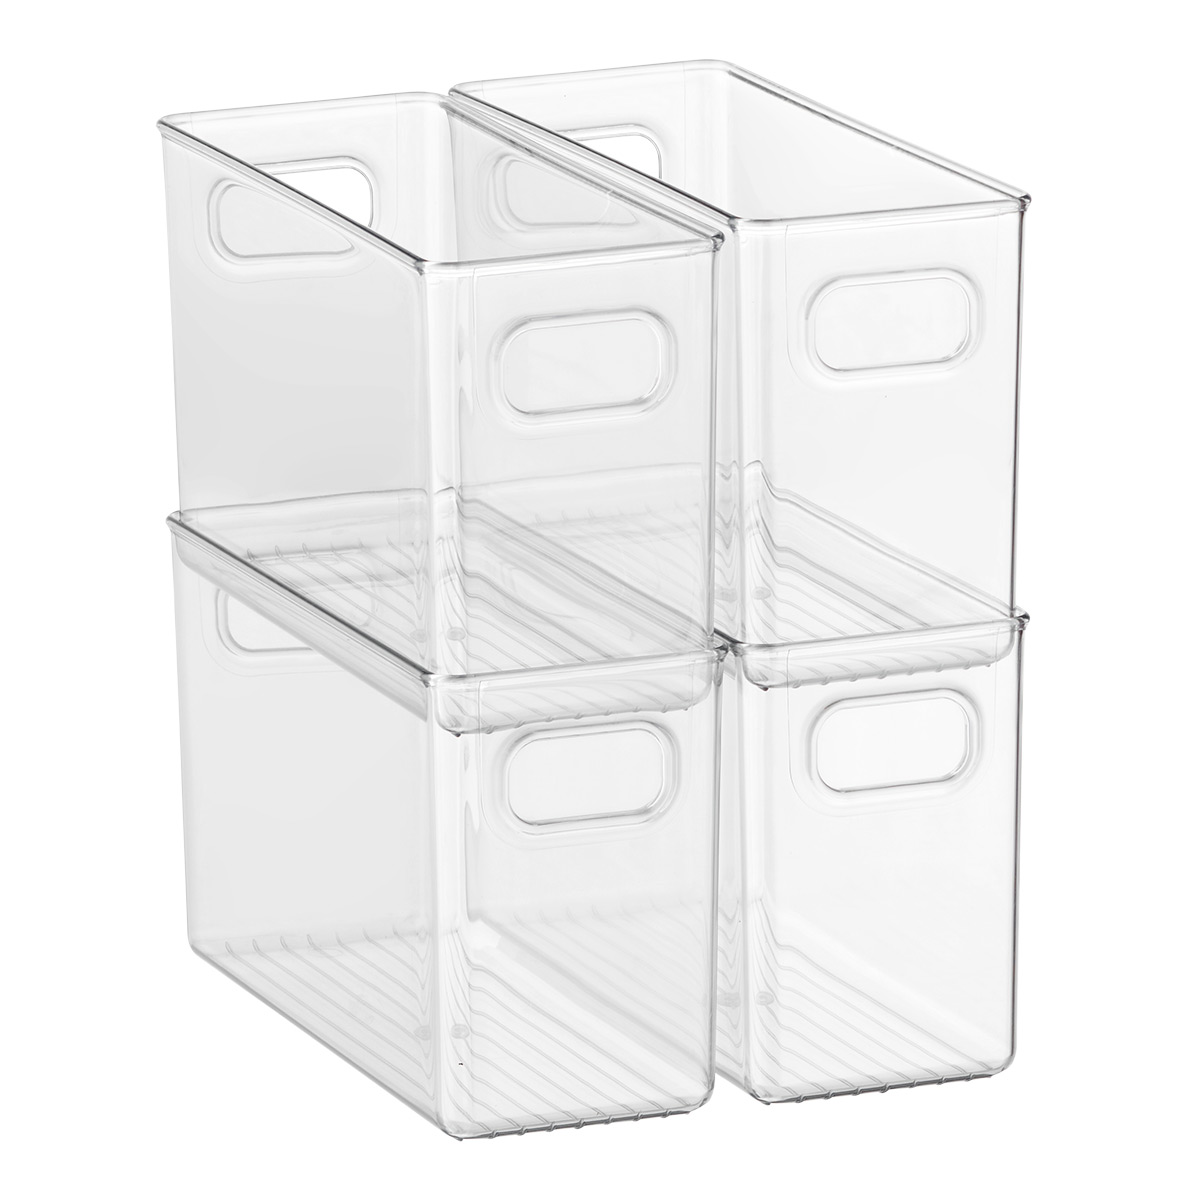 https://www.containerstore.com/catalogimages/490007/10090430-narrow-pantry-bin-4ct.jpg